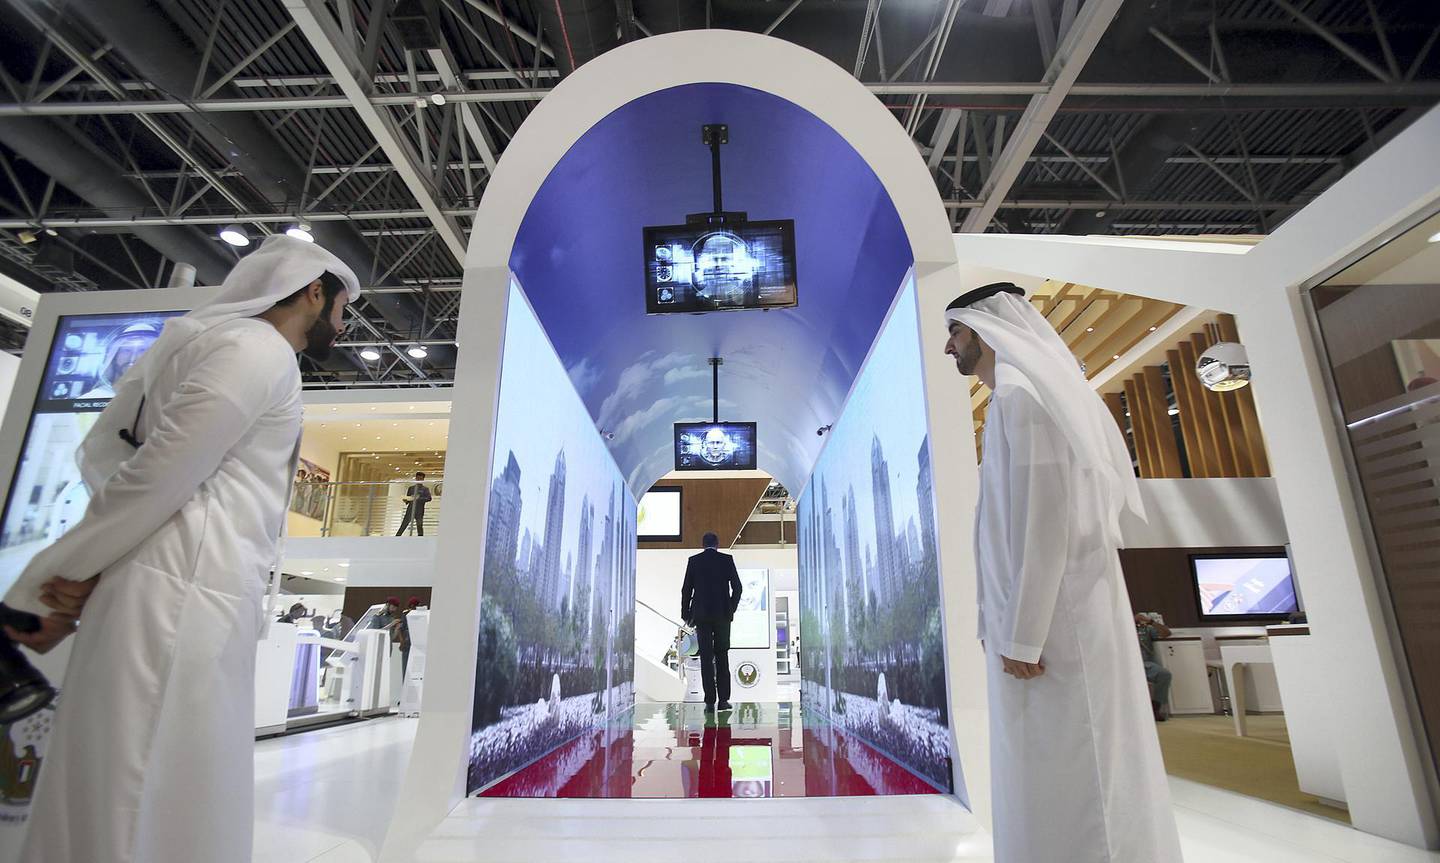 Dubai, 08, Oct, 2017 : Visitors take a look at the new Smart Tunnel at the  Dubai Naturalization and Residency stand during the  37th Gitex Technology Week at the World Trade Centre in Dubai. Satish Kumar / For the National